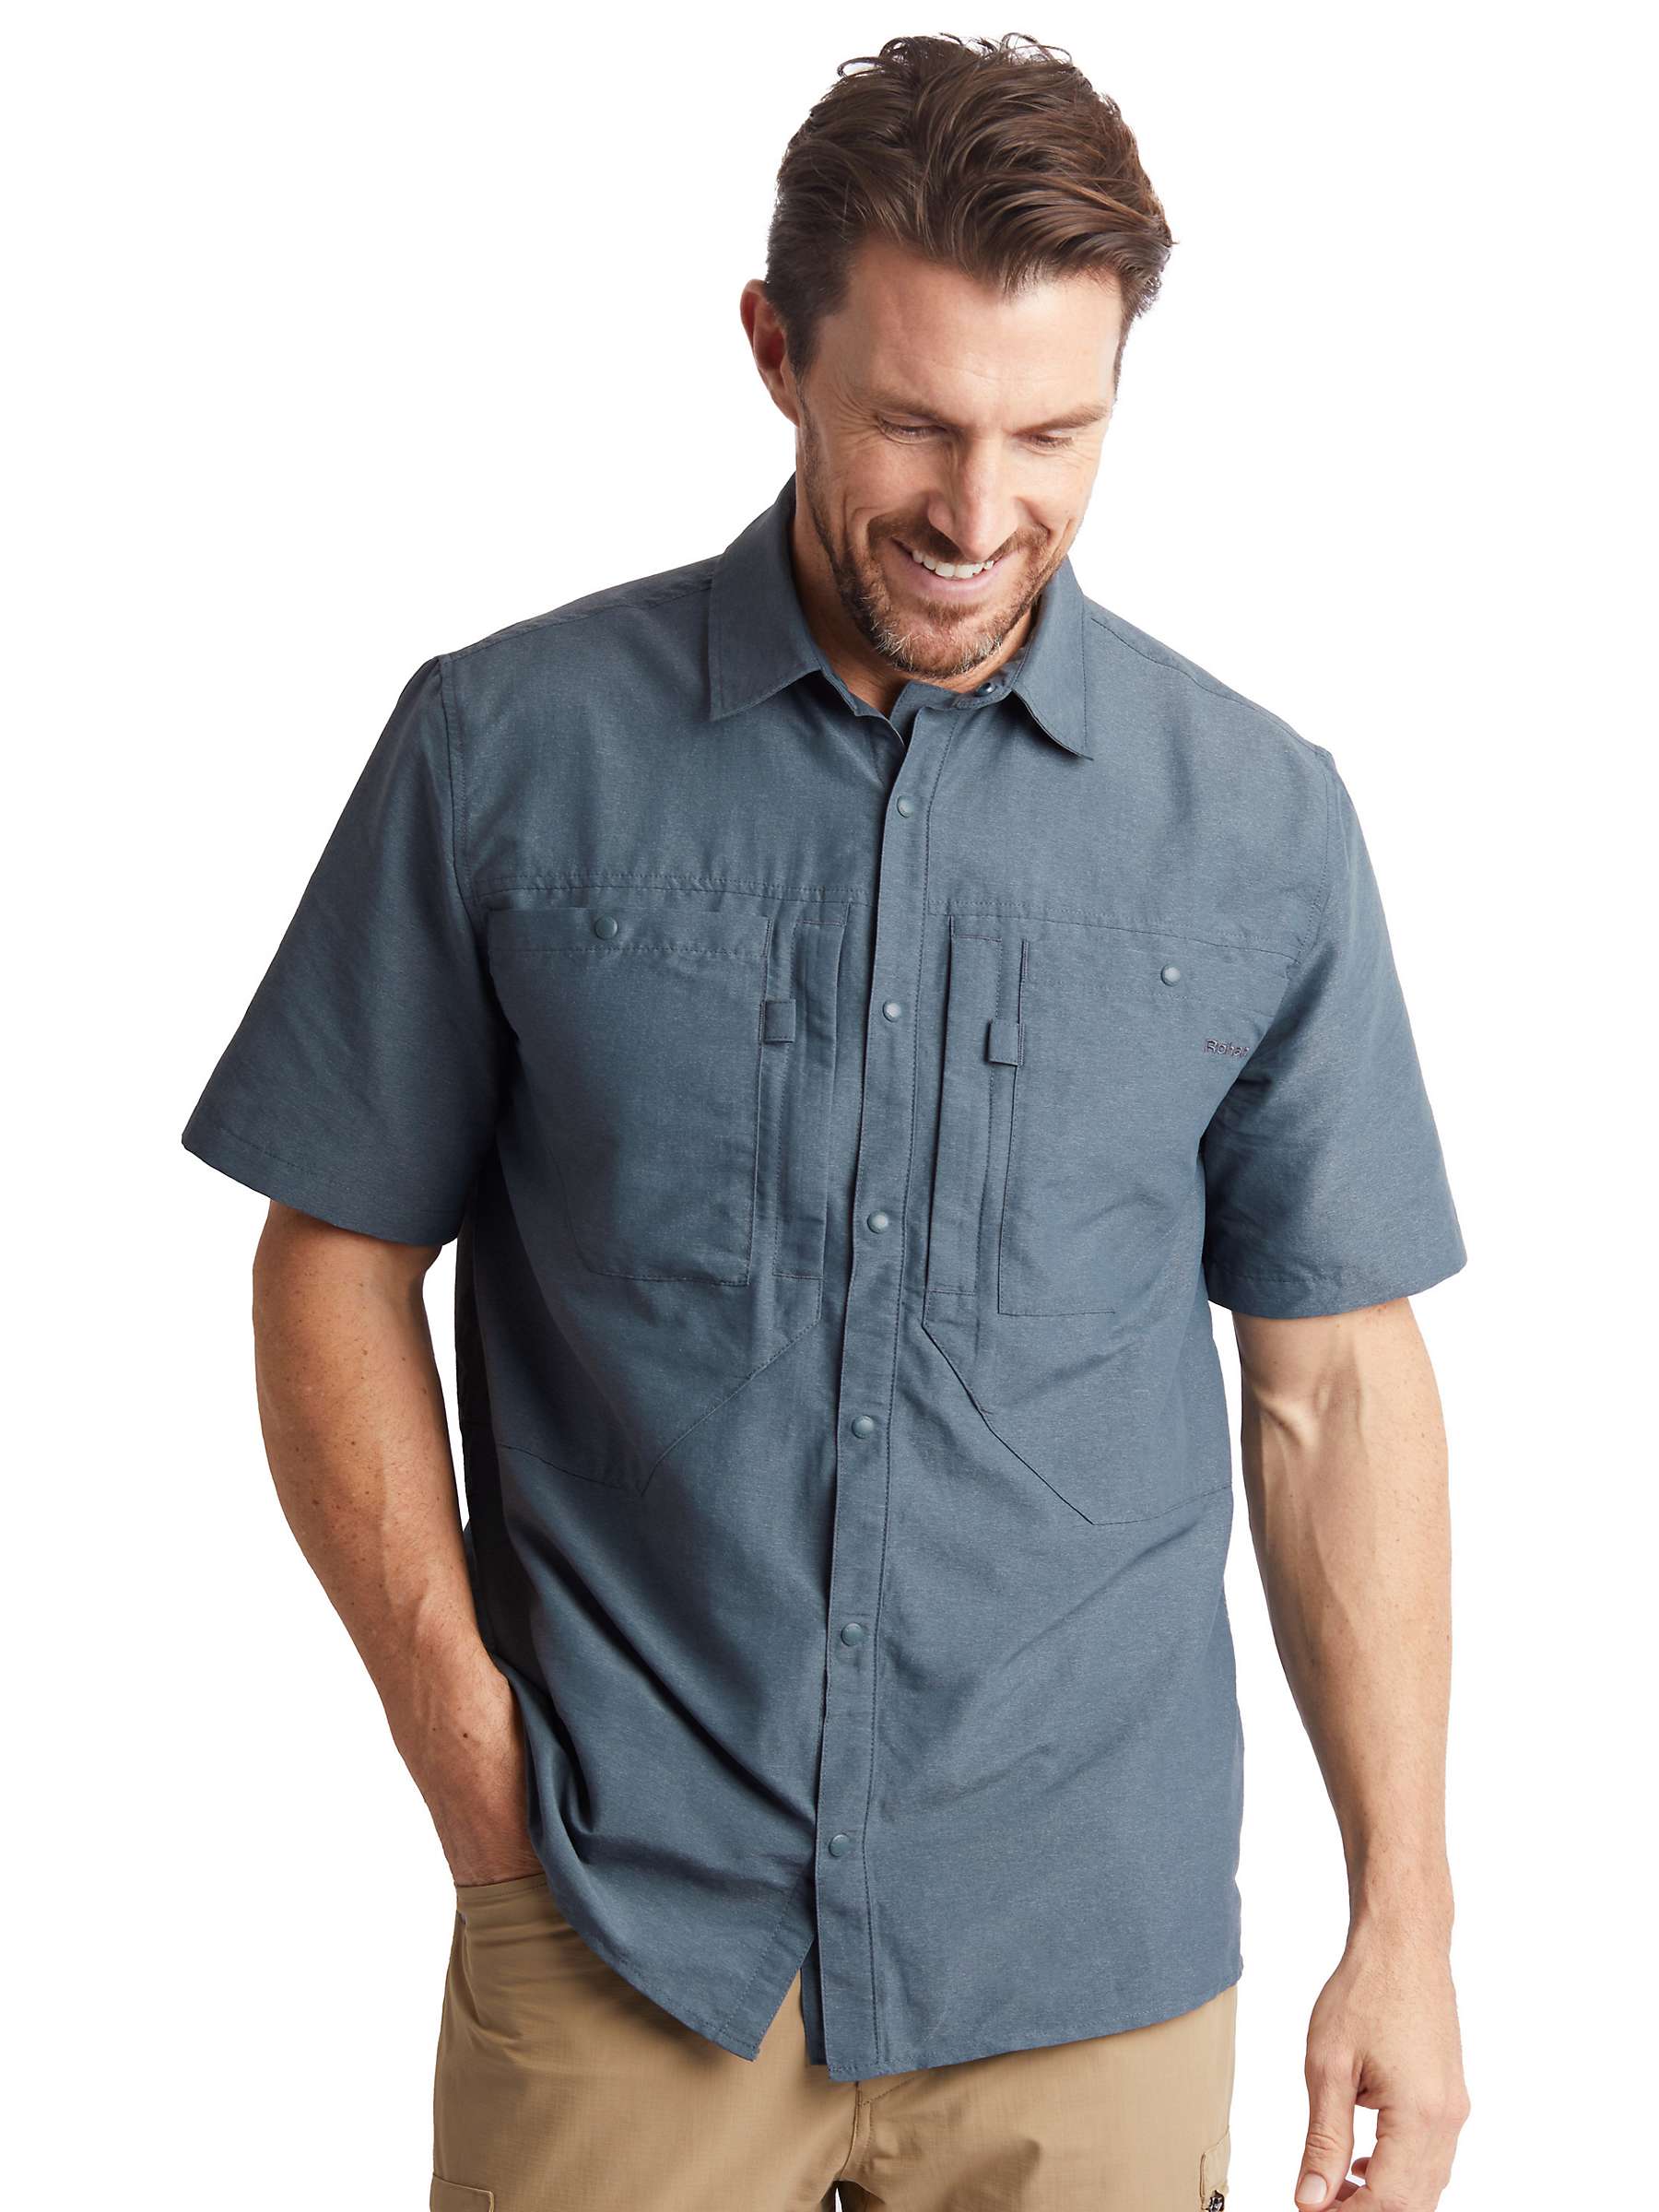 Buy Rohan Frontier Anti-Insect Short Sleeve Expedition Shirt, Grey Online at johnlewis.com